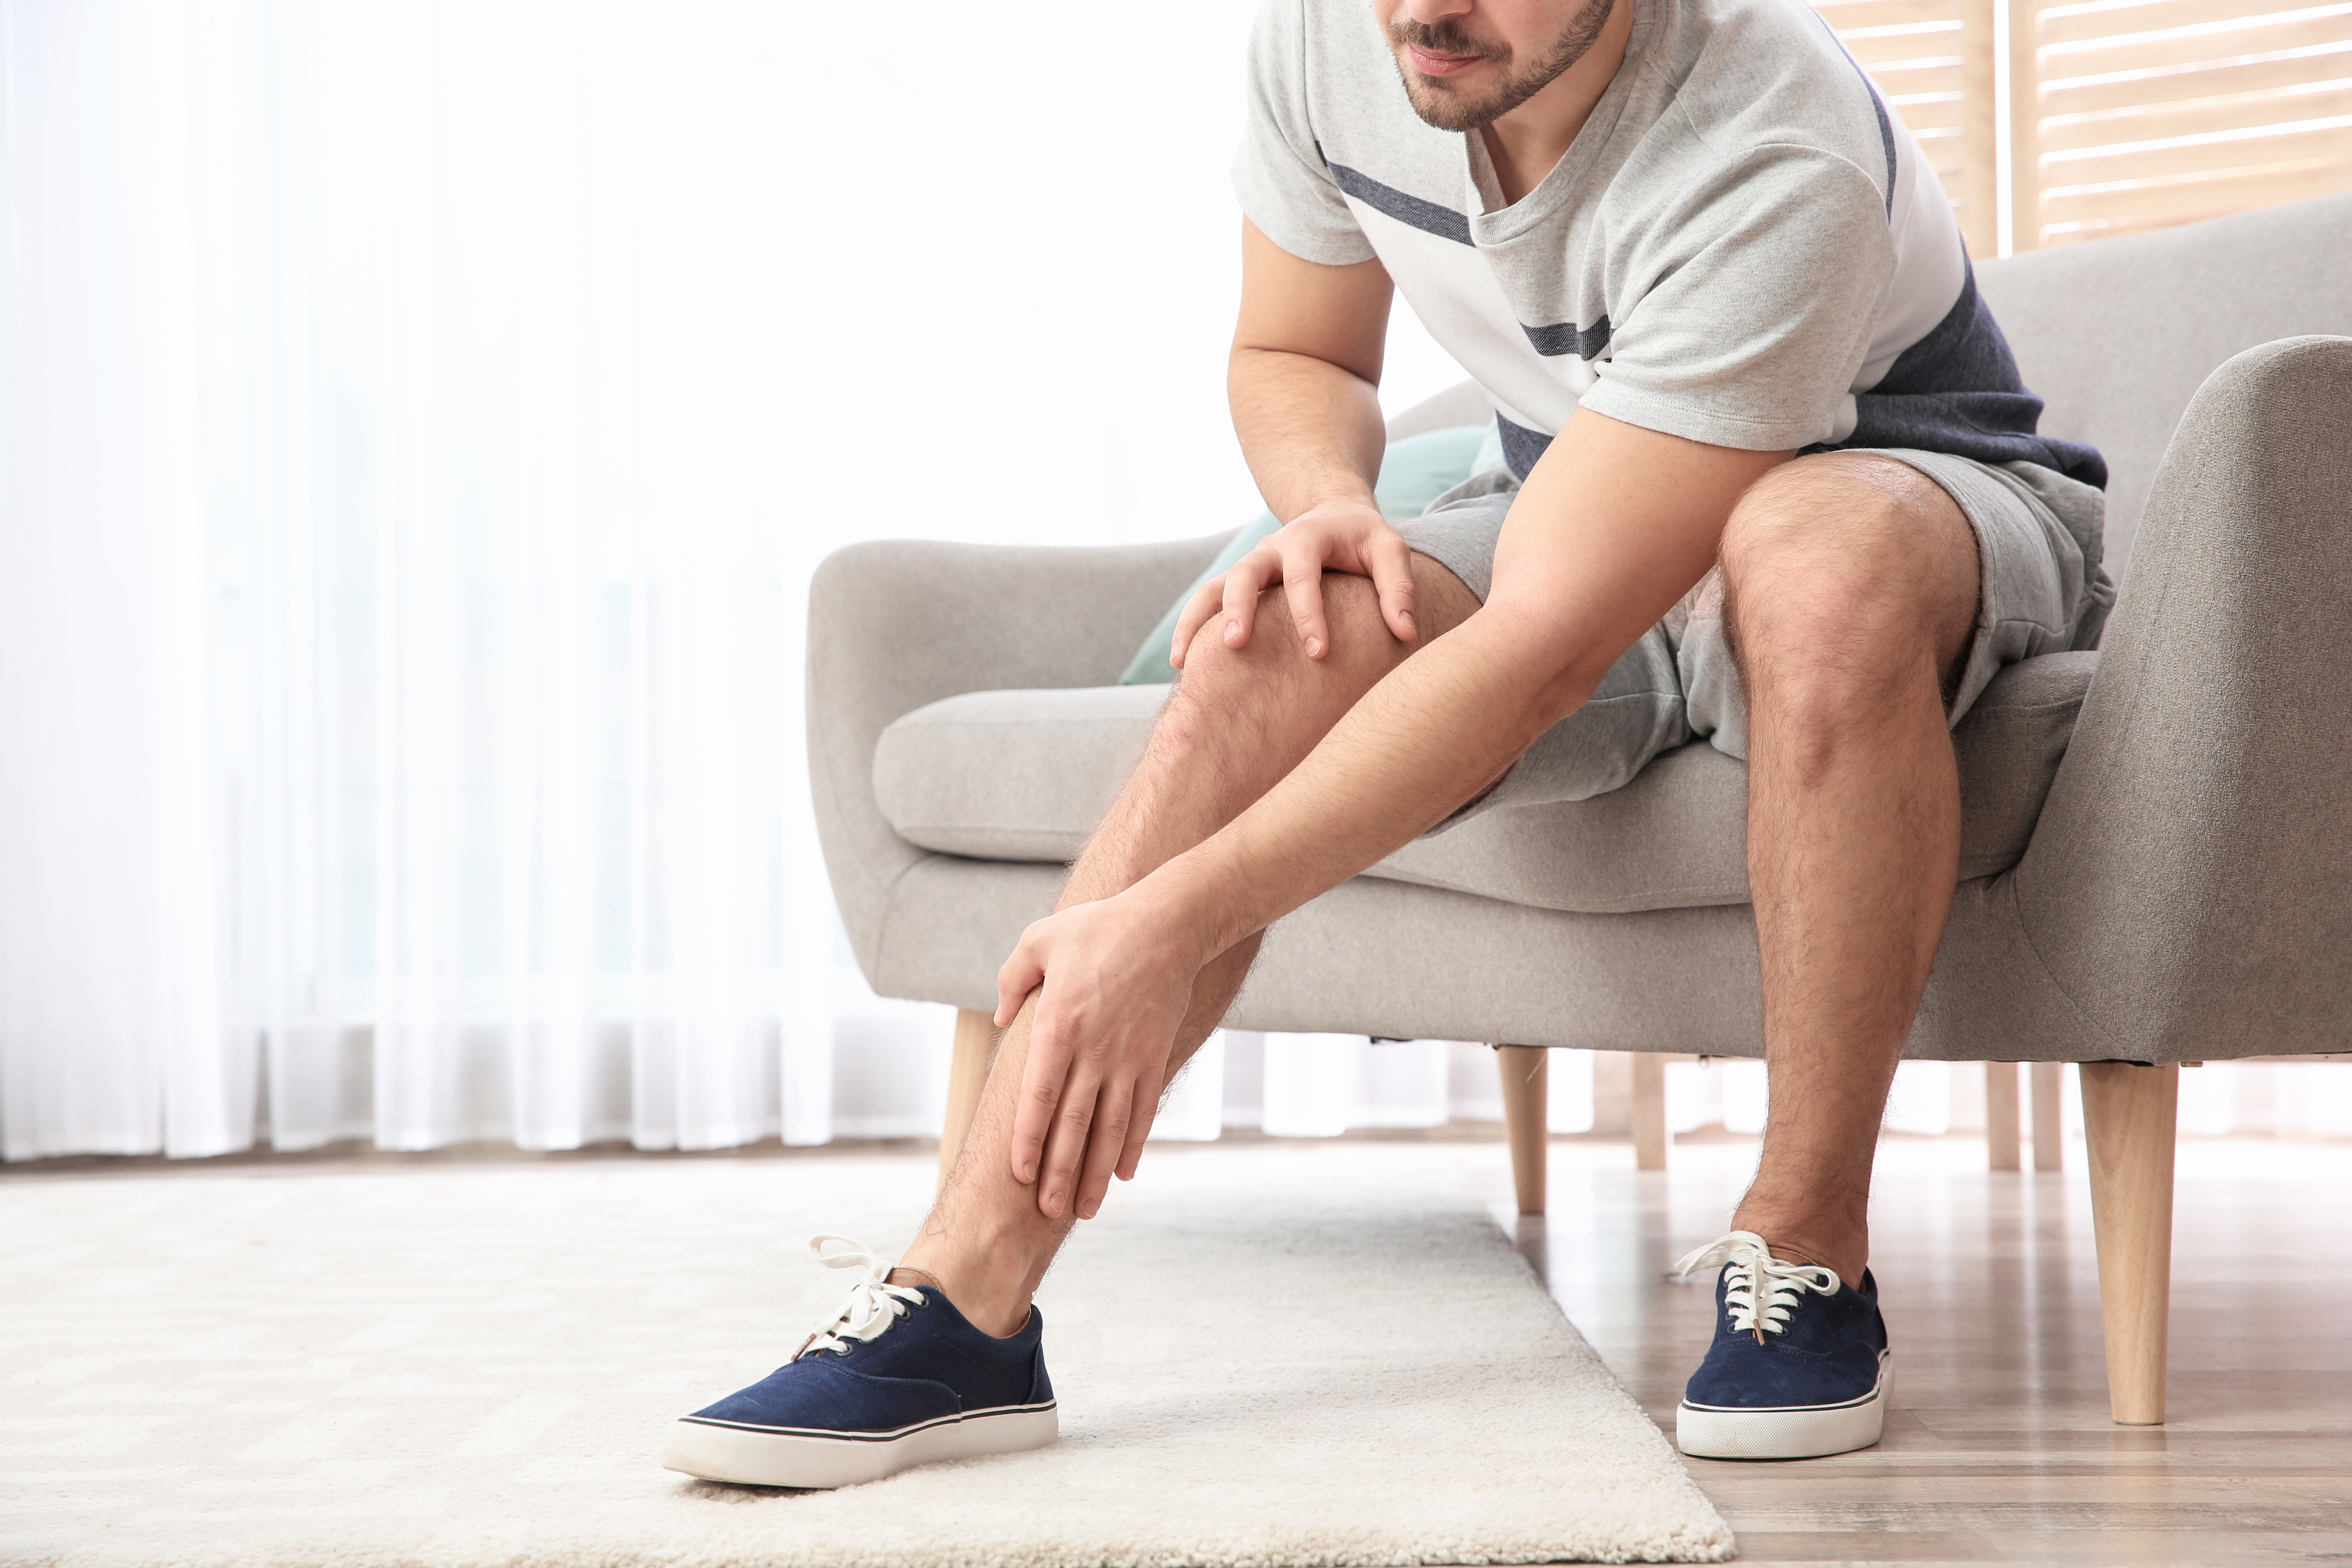 Heavy legs: Causes, home remedies, and relief